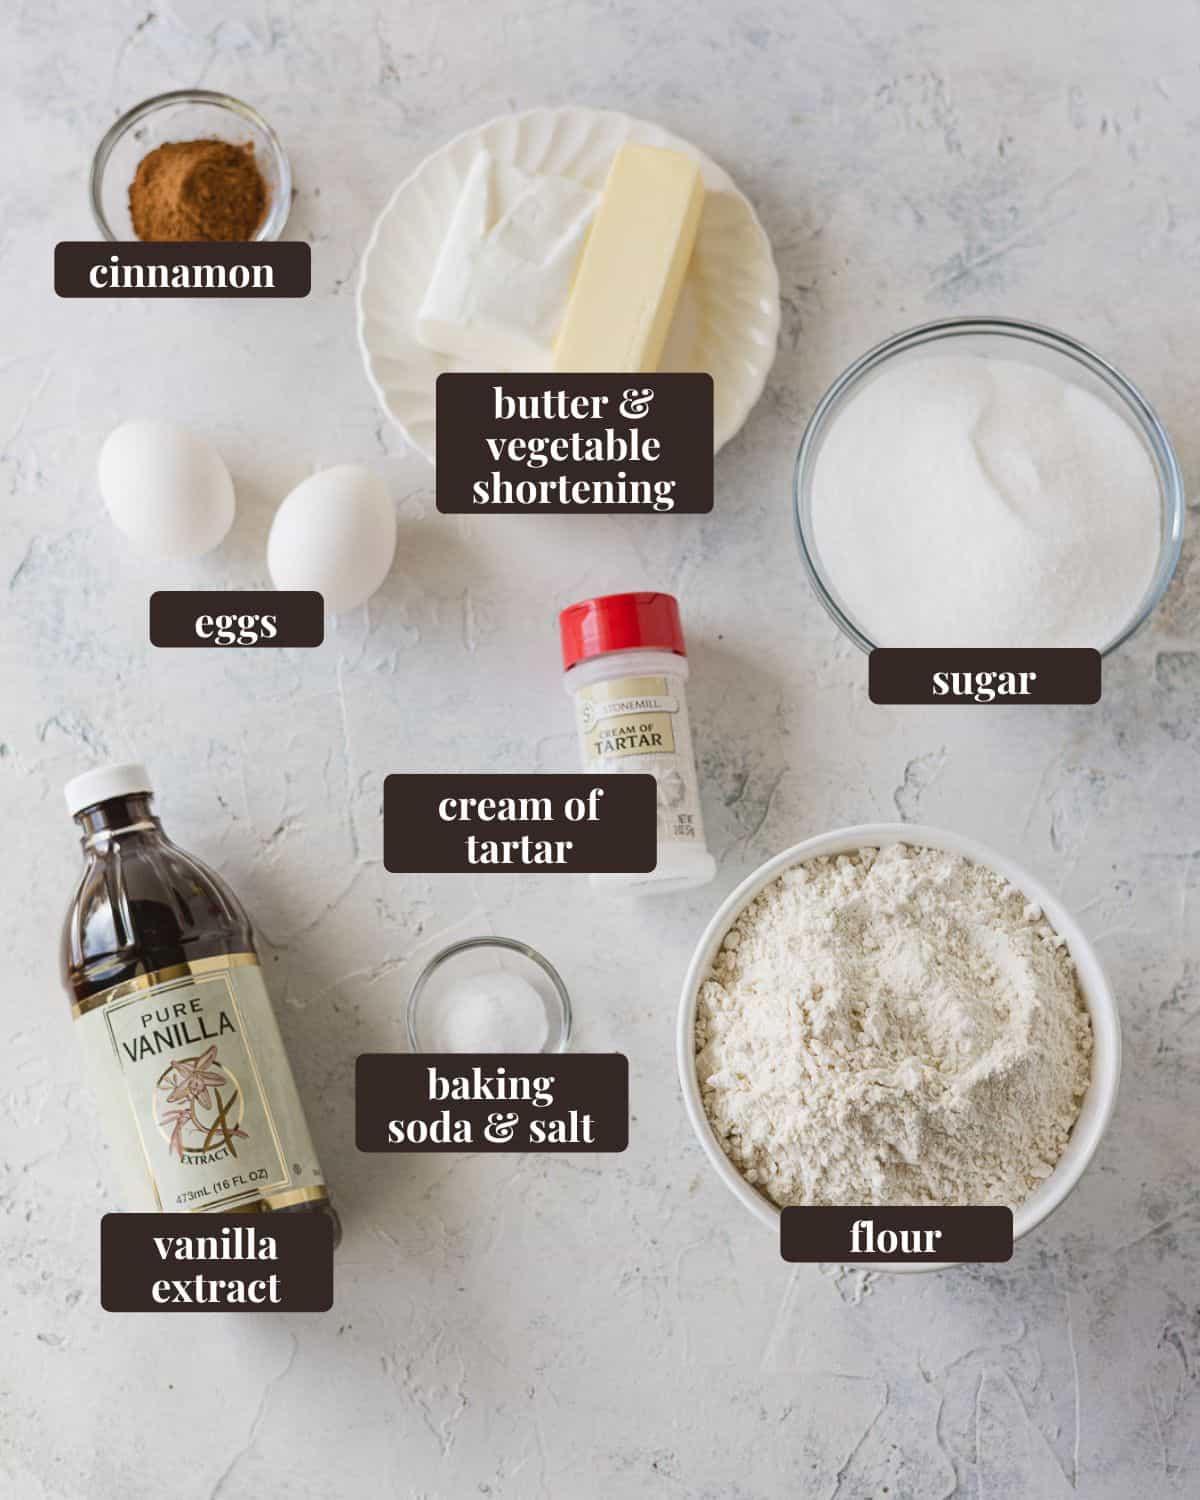 Labeled ingredients for Giant Crumbl Snickerdoodle Cookies: flour, baking soda & salt, vanilla extract, cream of tartar, eggs, cinnamon, butter and vegetable shortening, and sugar.